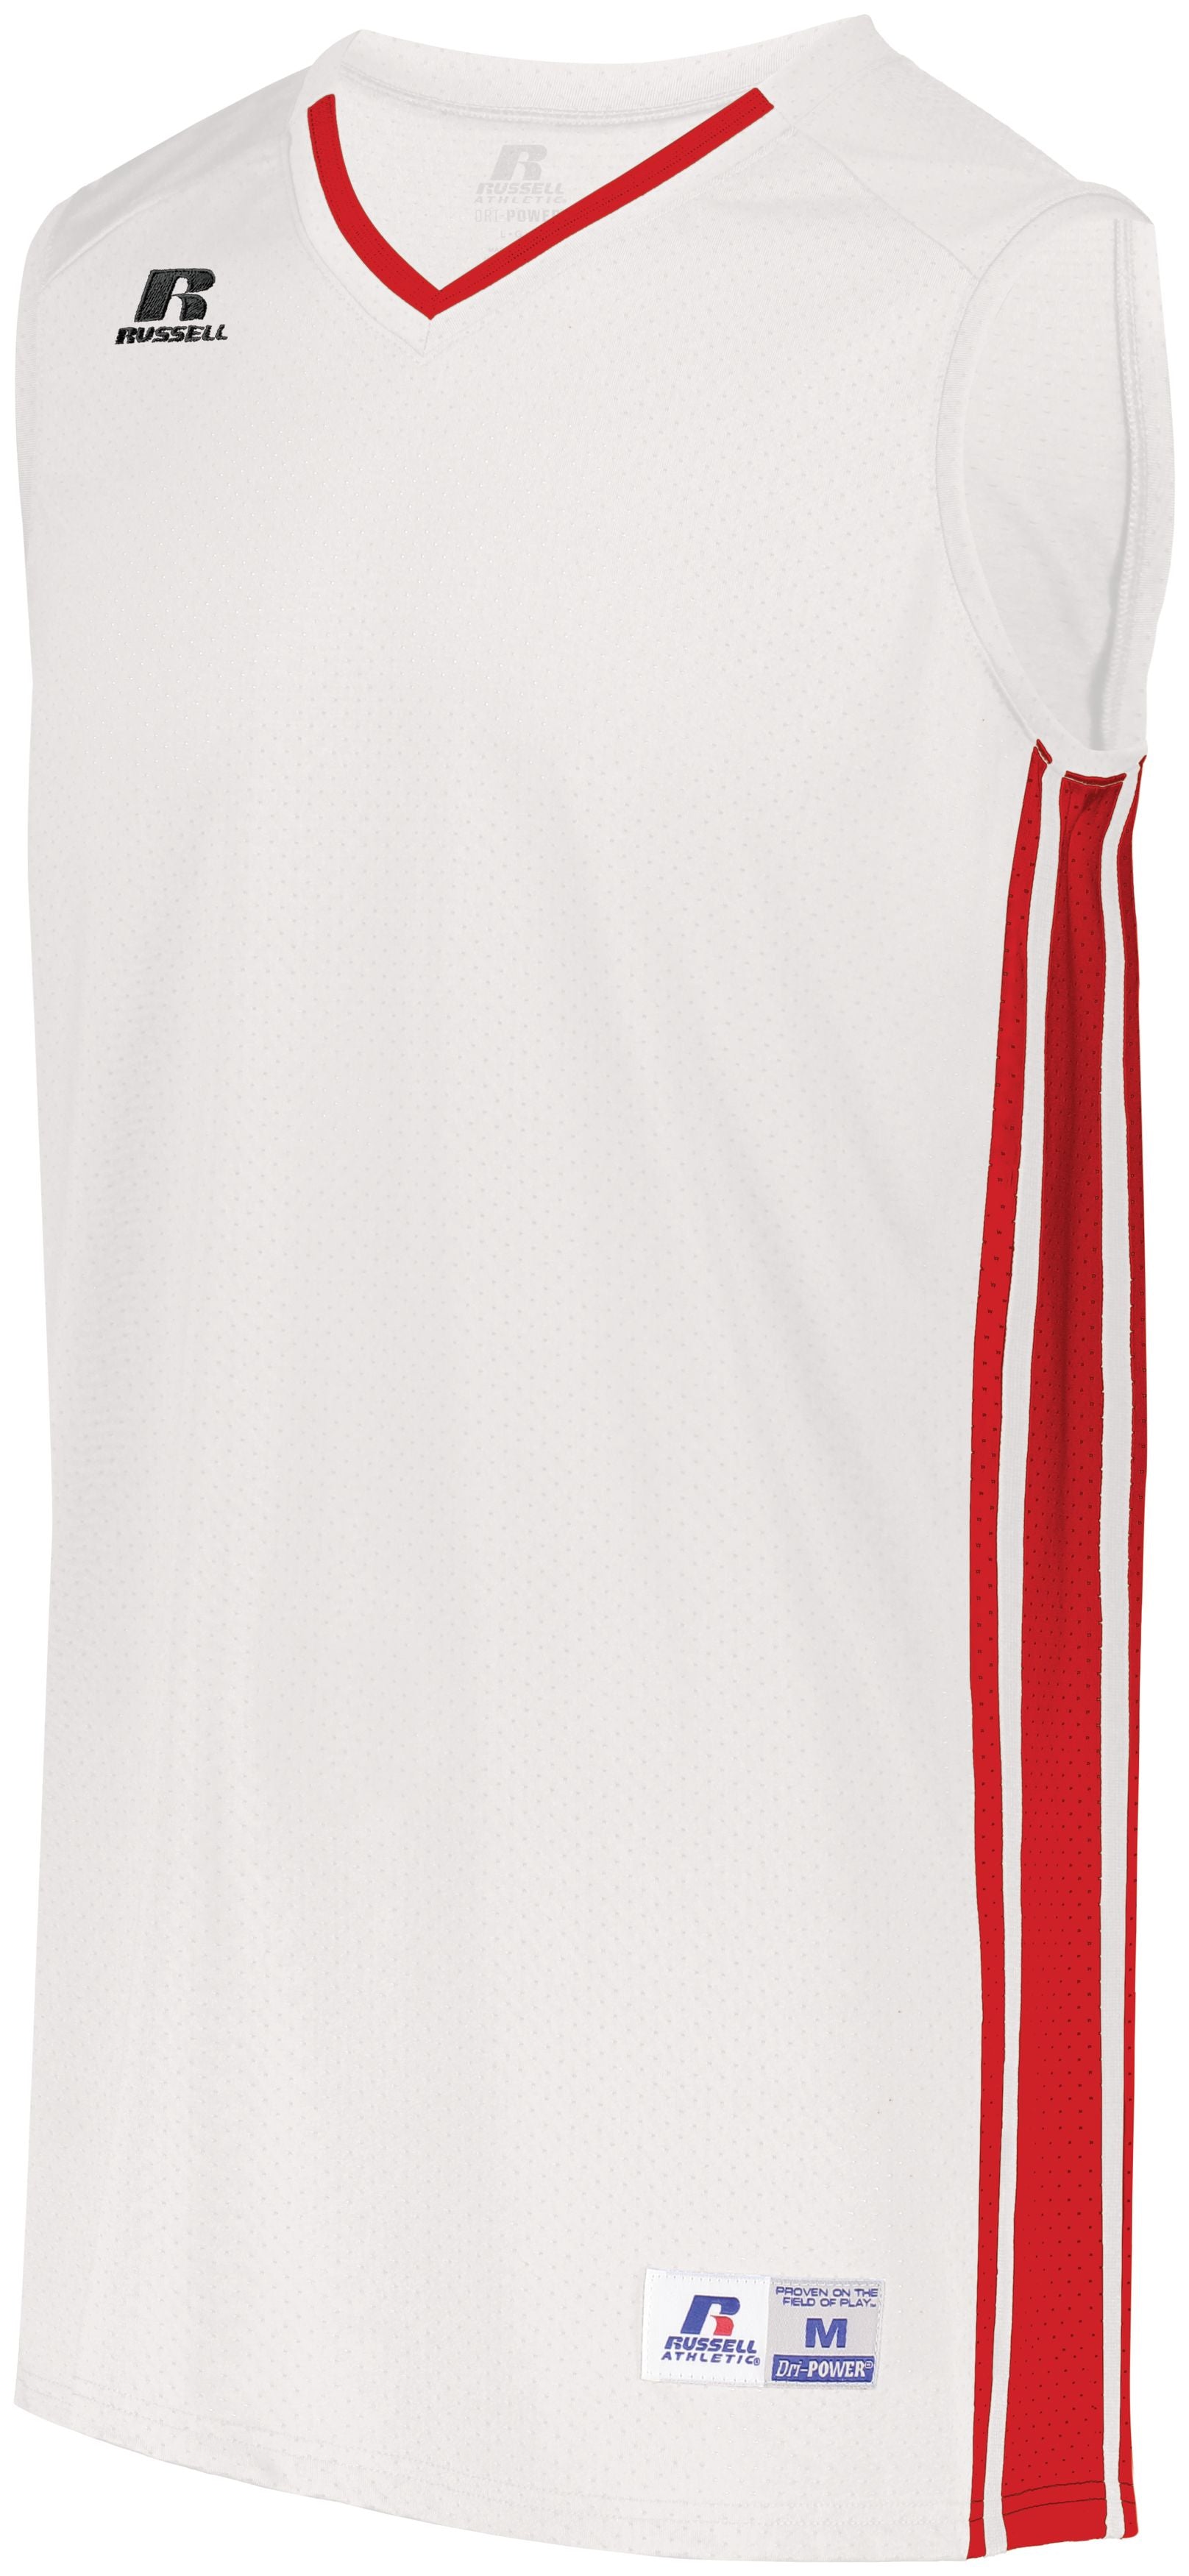 Russell Athletic Youth Legacy Basketball Jersey in White/True Red  -Part of the Youth, Youth-Jersey, Basketball, Russell-Athletic-Products, Shirts, All-Sports, All-Sports-1 product lines at KanaleyCreations.com